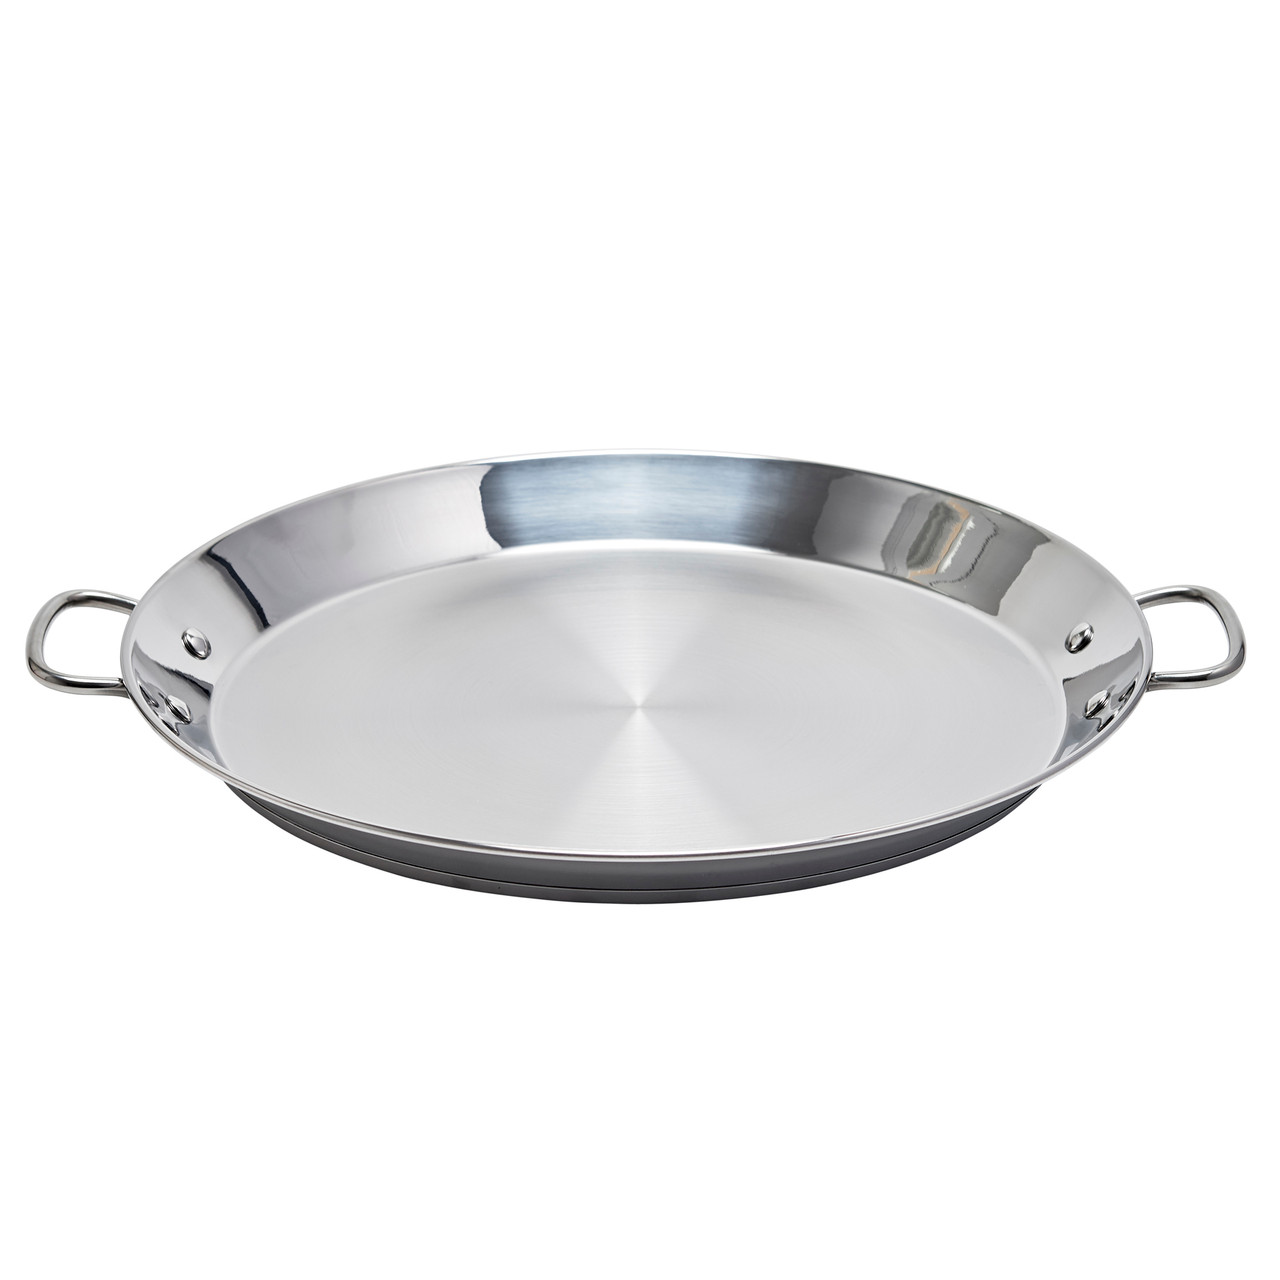 16 Inch Stainless Steel Frying Pan Paella Pan with 2 Sides Handles Wide and  Shallow Dimpled Surface and Flared Sides That Cook Food Fast Great for  Stovetop or O…